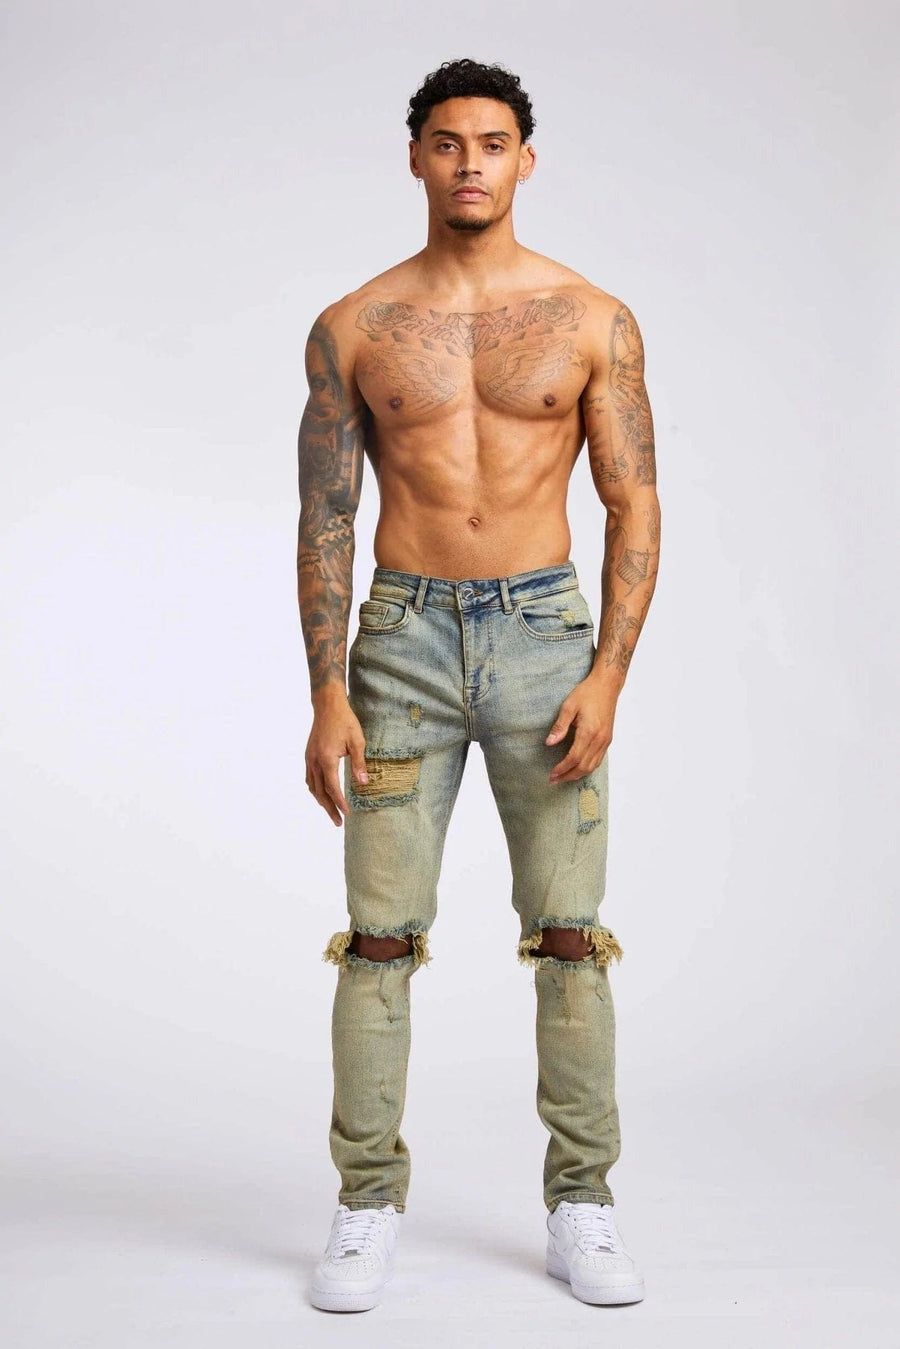 Legend London Jeans SLIM FIT JEANS - VINTAGE STONE WASH RIPPED & REPAIRED